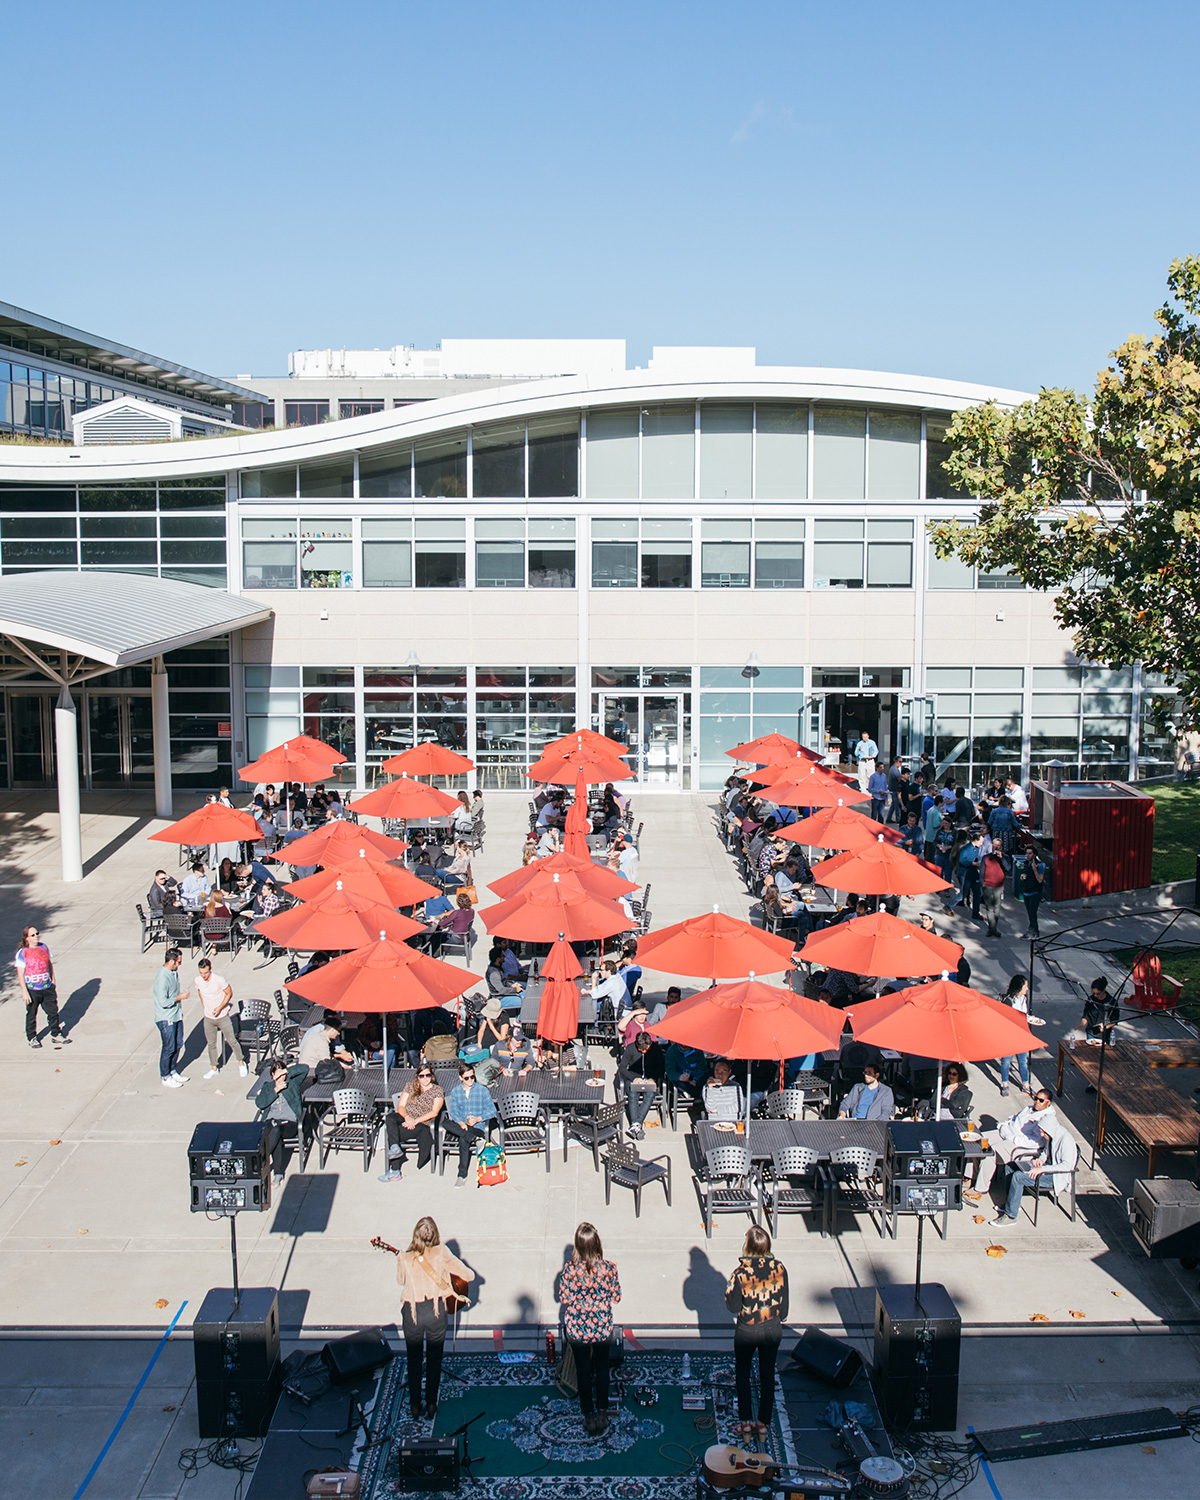 An aerial shot of the YouTube outdoor seating area, looking at the red patio umbrellas.